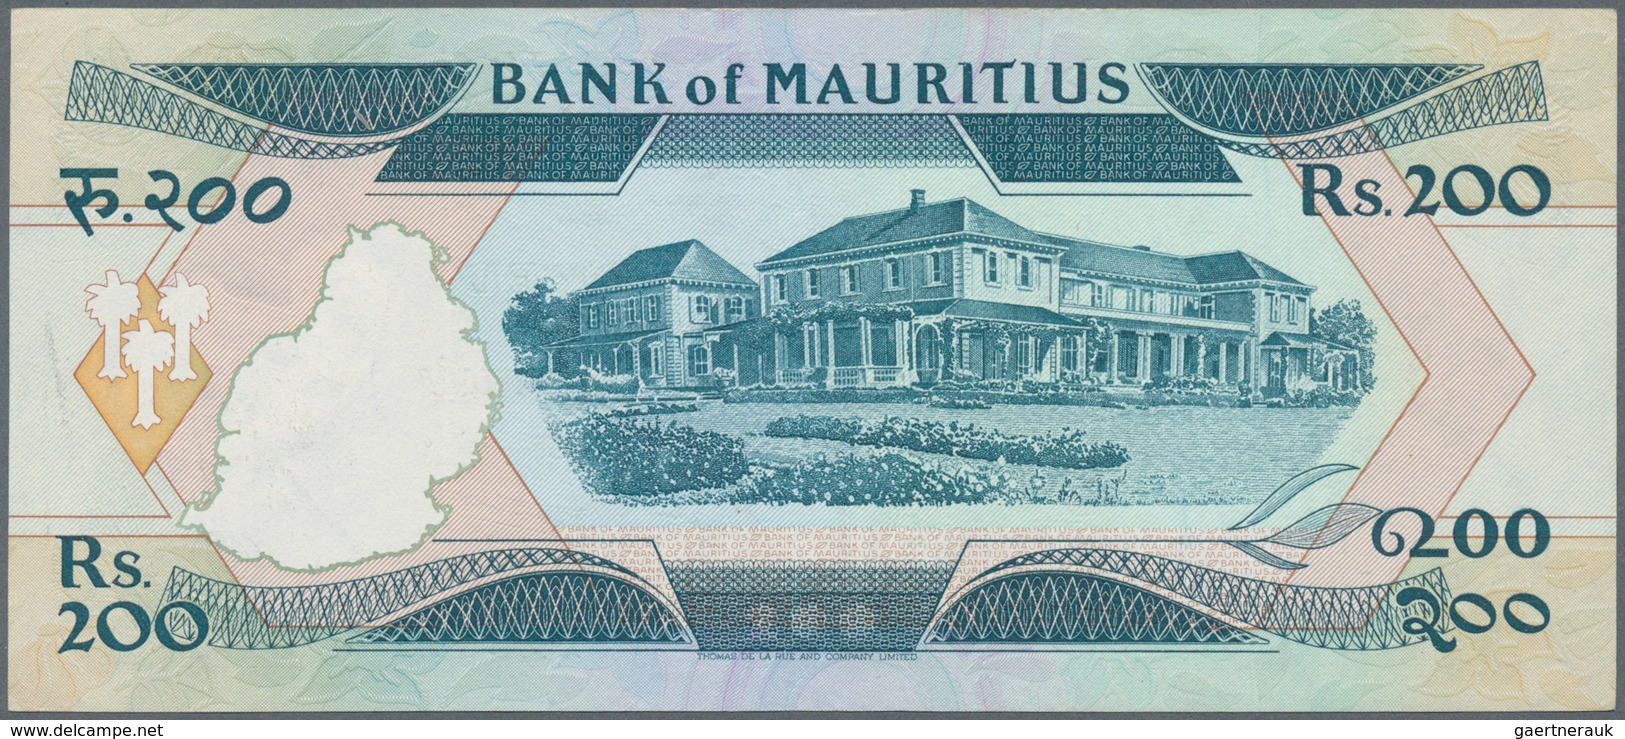 Mauritius: Pair With 500 Rupees ND(1988) P.40b (VF+) And 200 Rupees ND(1985) P.39 (UNC). (2 Pcs.) - Mauricio